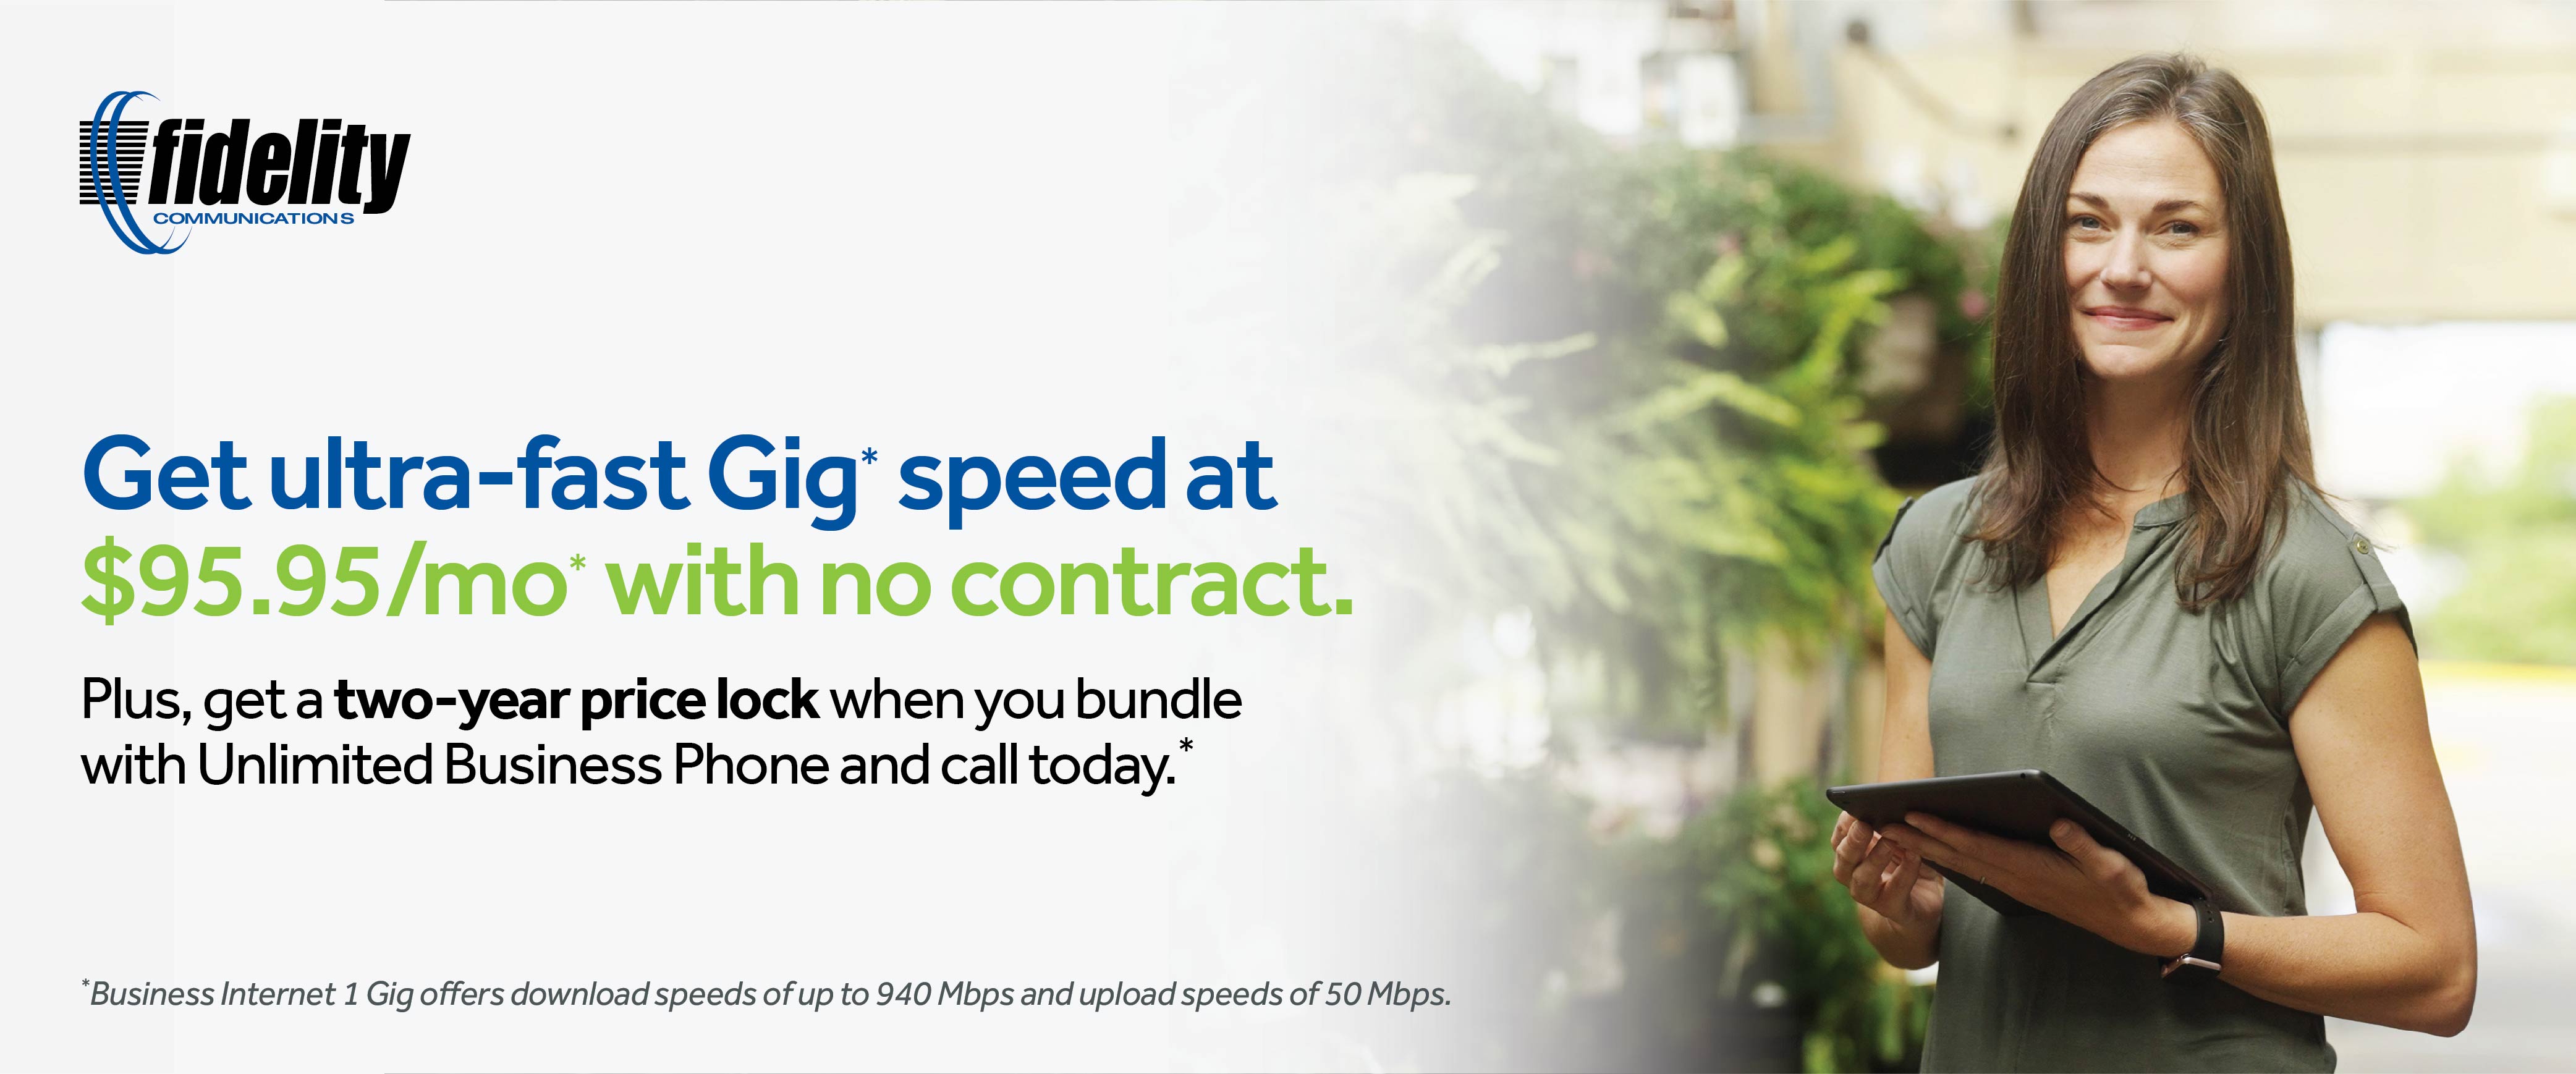 Get ultra-fast Gig * speed at $95.95/mo* with no contract. Plus, get a two-year price lock when you bundle with Unlimited Business Phone and call today. * *Business ߣߣƵ 1 Gig offers download speeds of up to 940 Mbps and upload speeds of 50 Mbps.